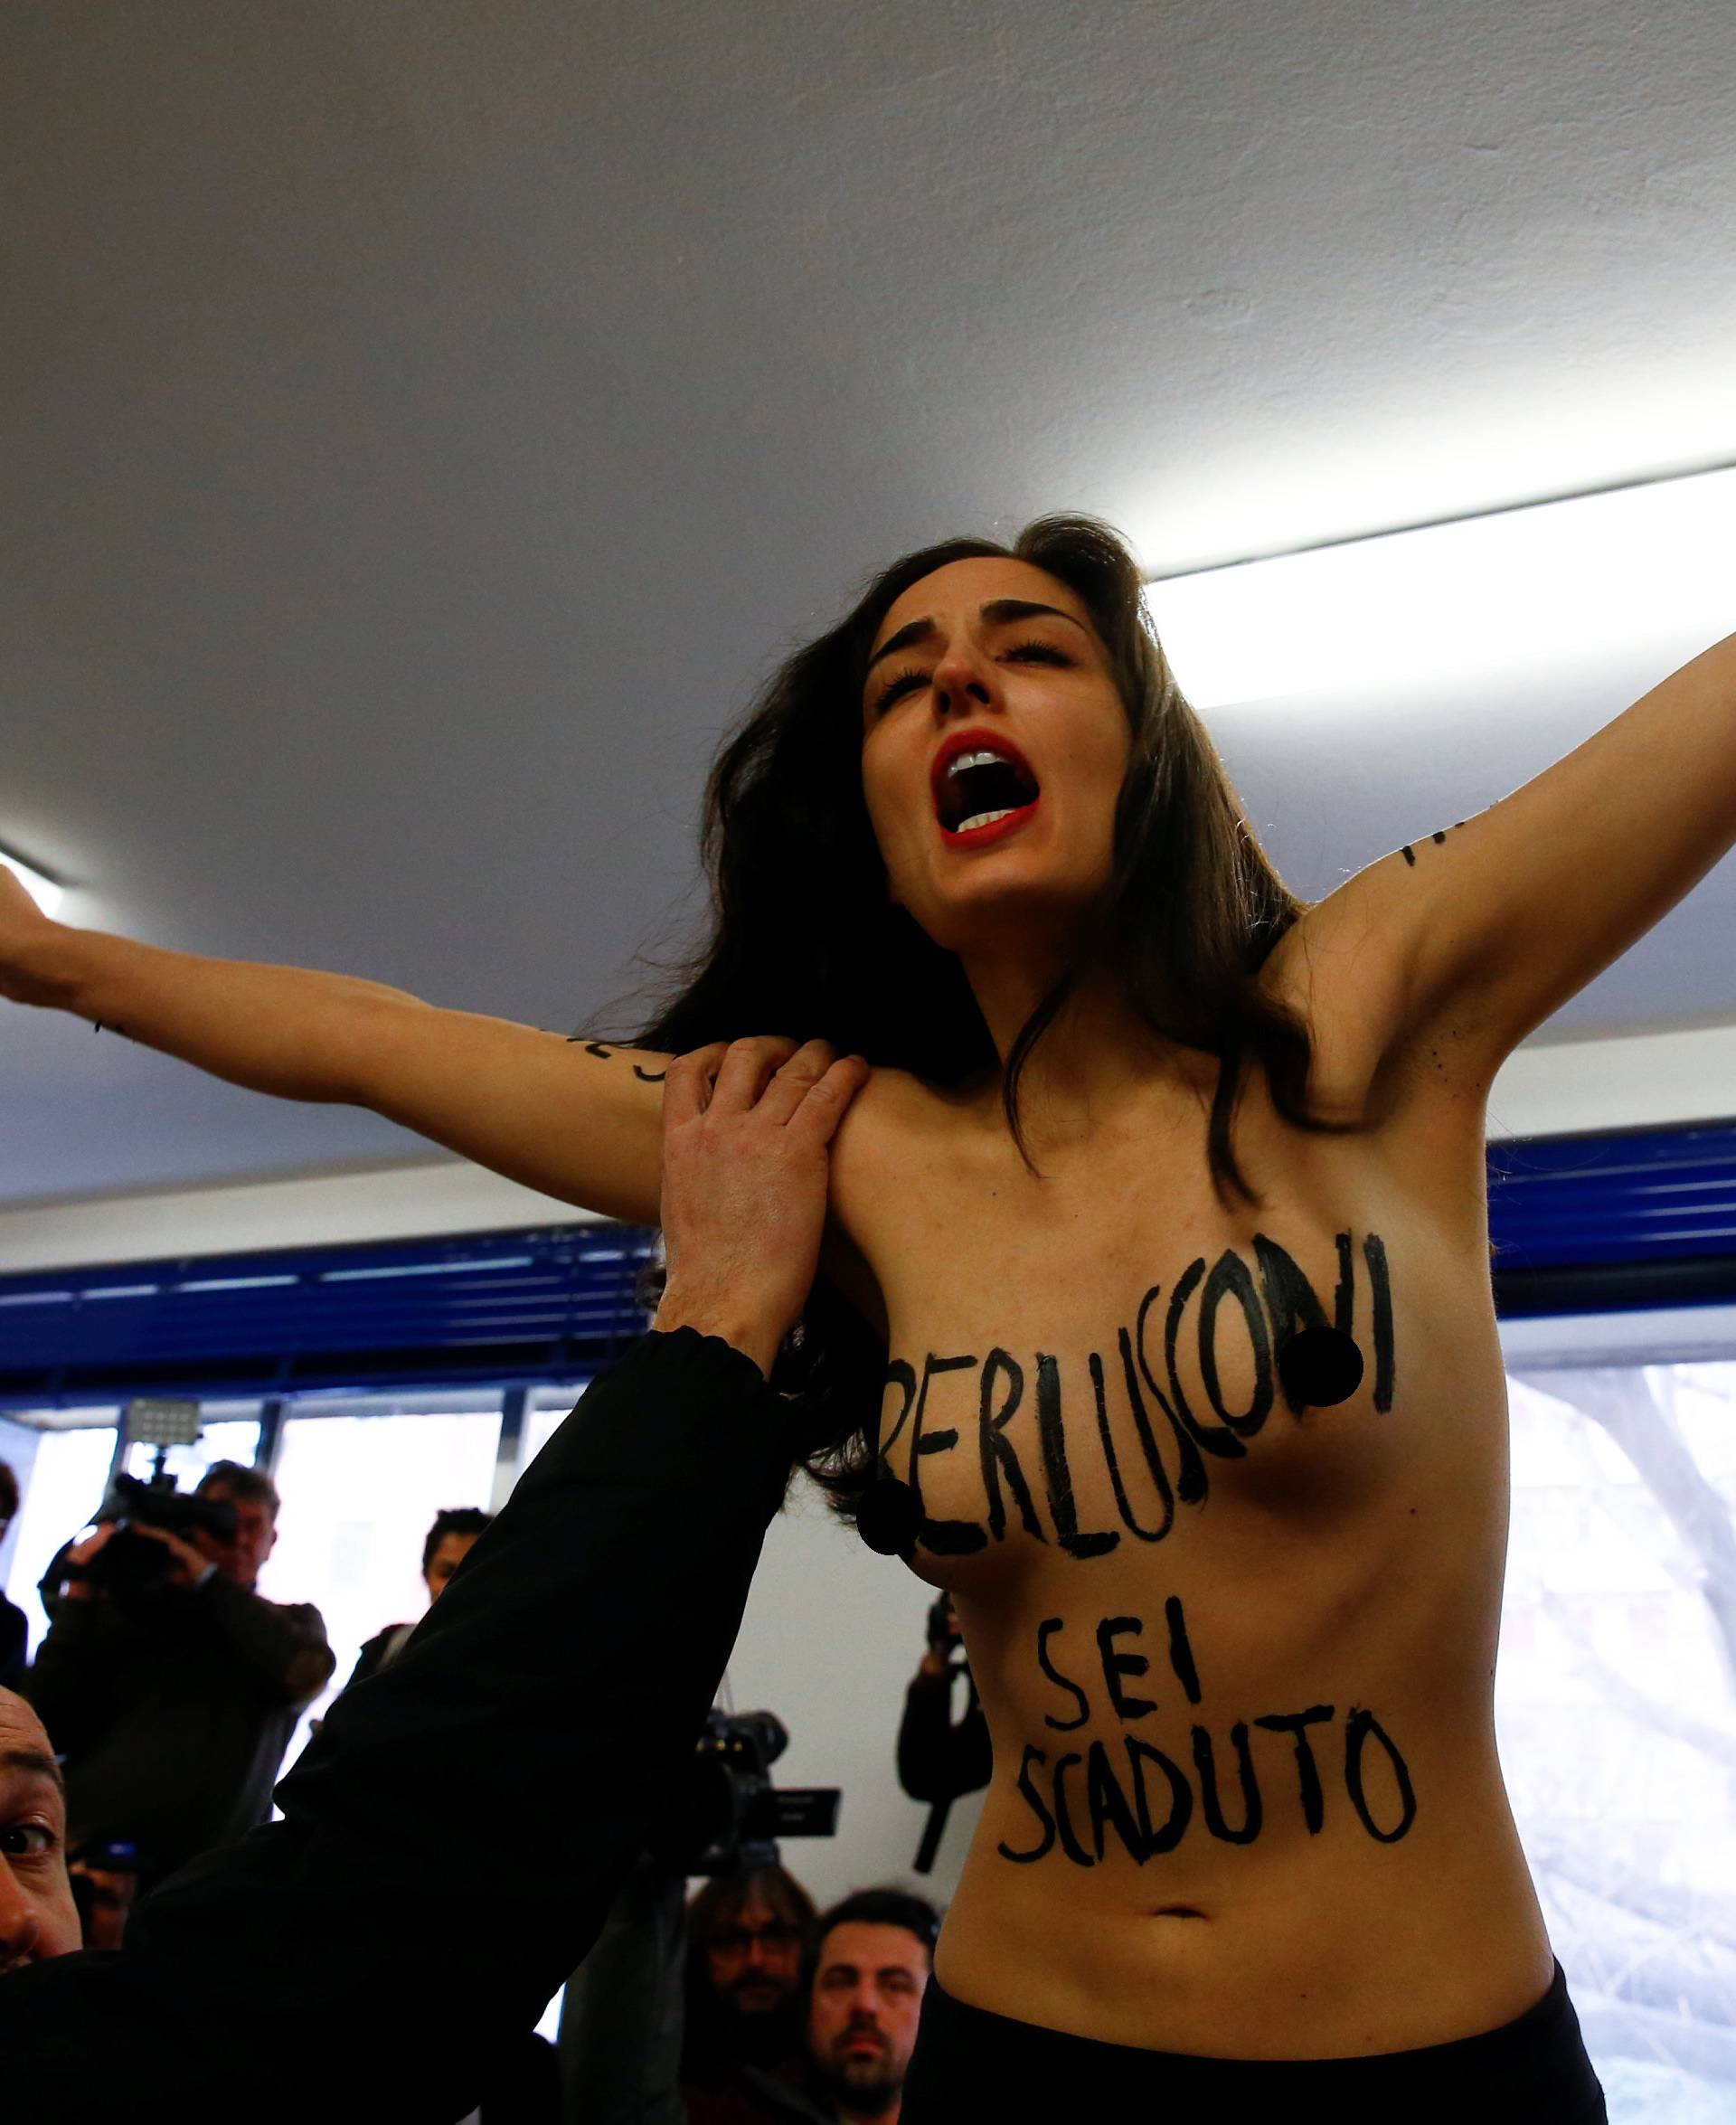 A topless activist of women's rights group Femen interrupts voting as Forza Italia party leader Silvio Berlusconi casts his vote at a polling station in Milan